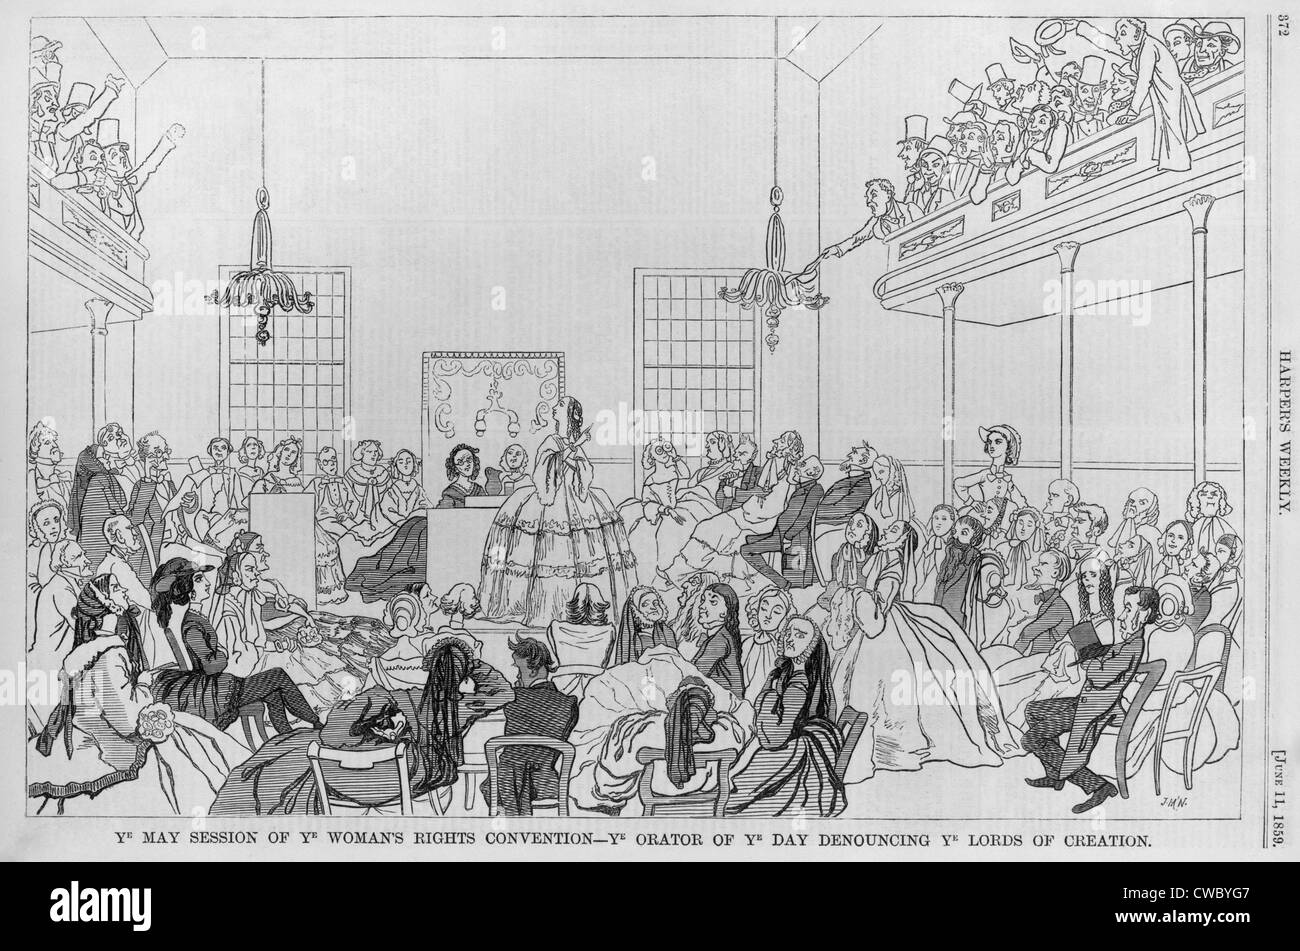 1859 print satirizing the 9th Women Rights Convention in New York City with the 'Ye May session of ye woman's rights convention Stock Photo